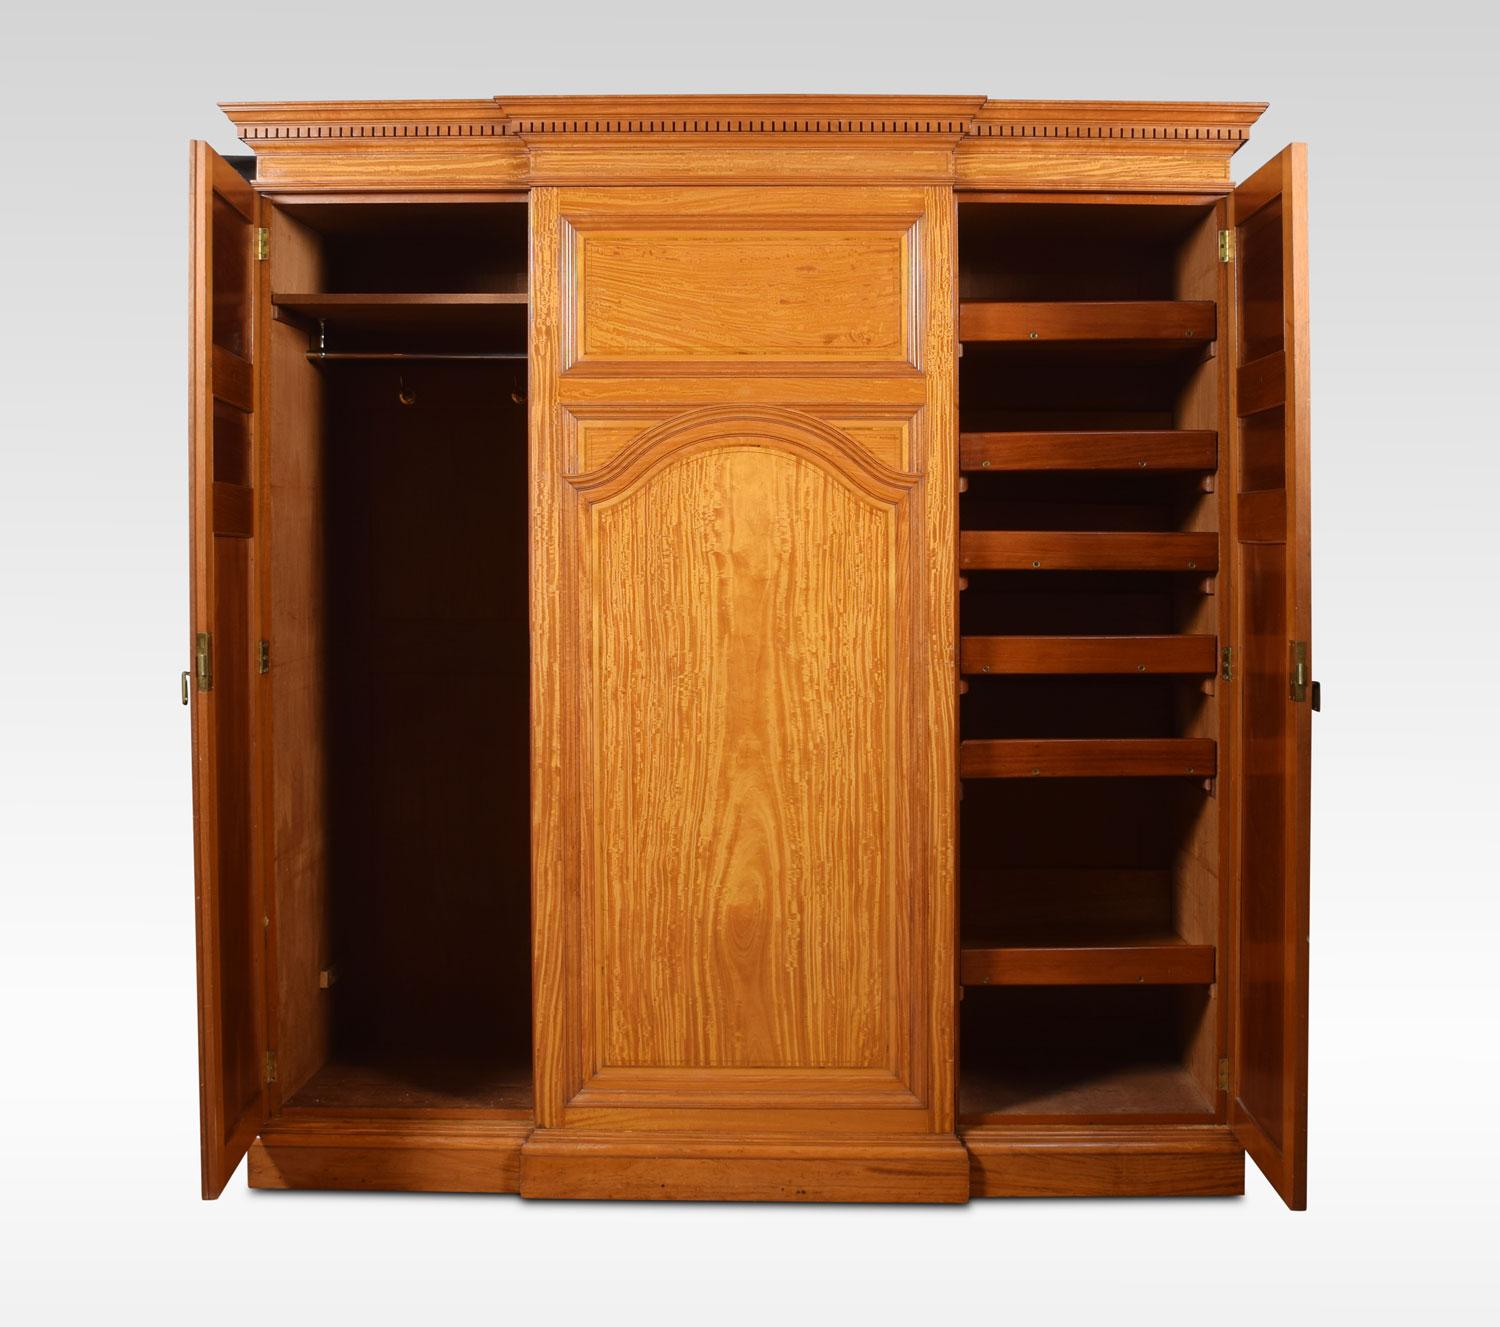 Howard and Sons satinwood breakfront combination wardrobe, having flared cornice with dentil mouldings. Above a centre door with rectangular panel over an arch panel, flanked by a pair of three-panel doors opening to reveal fitted interior. The